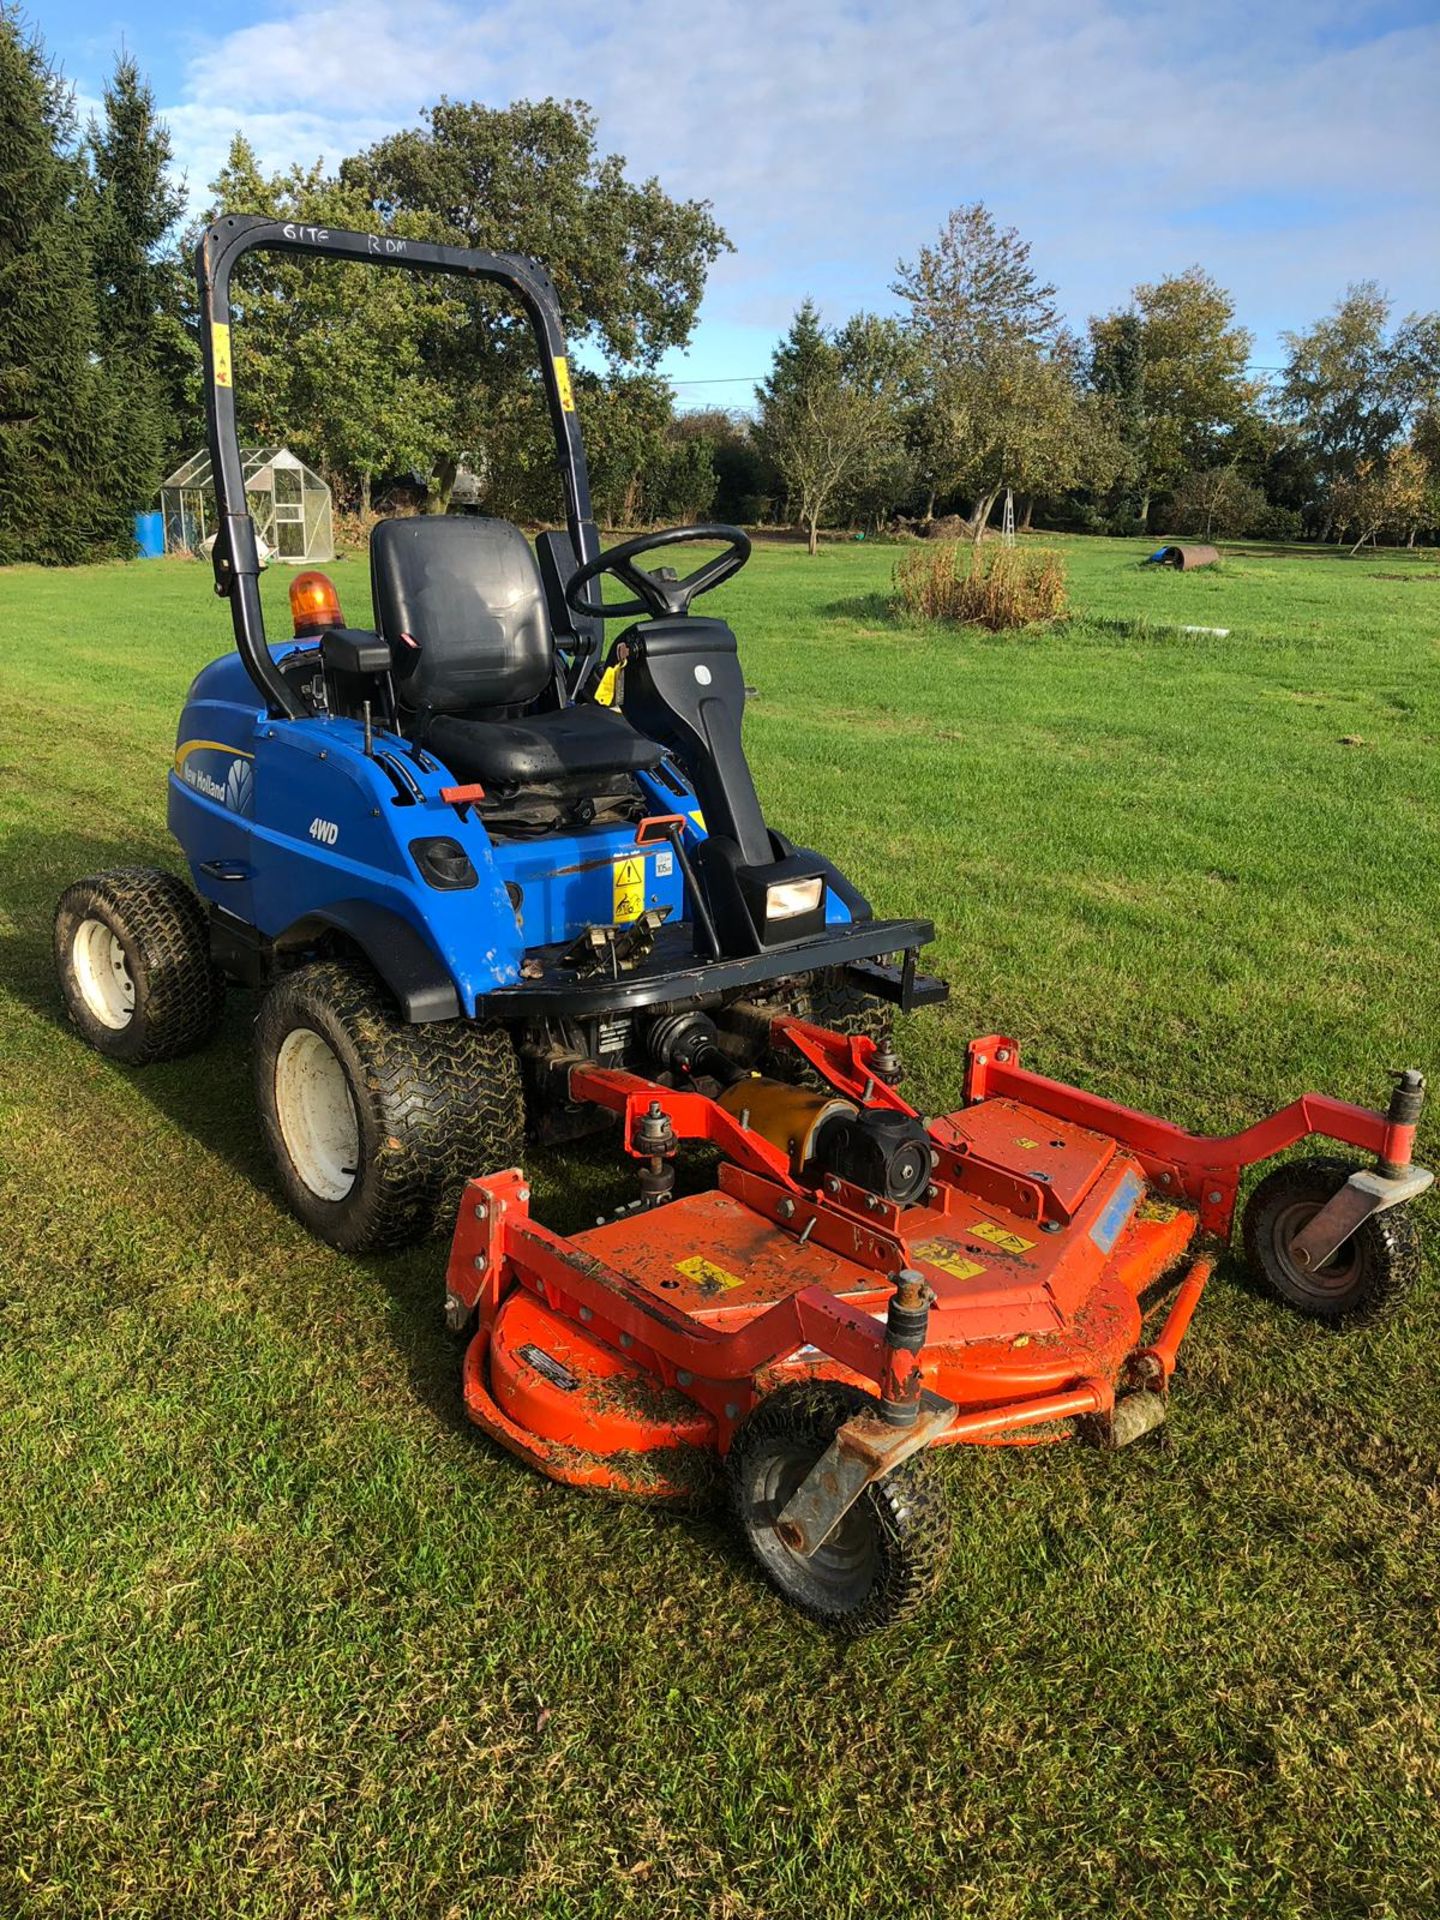 2010/60 REG NEW HOLLAND MC35 4WD RIDE ON LAWN MOWER LOW HOURS *PLUS VAT* - Image 2 of 21